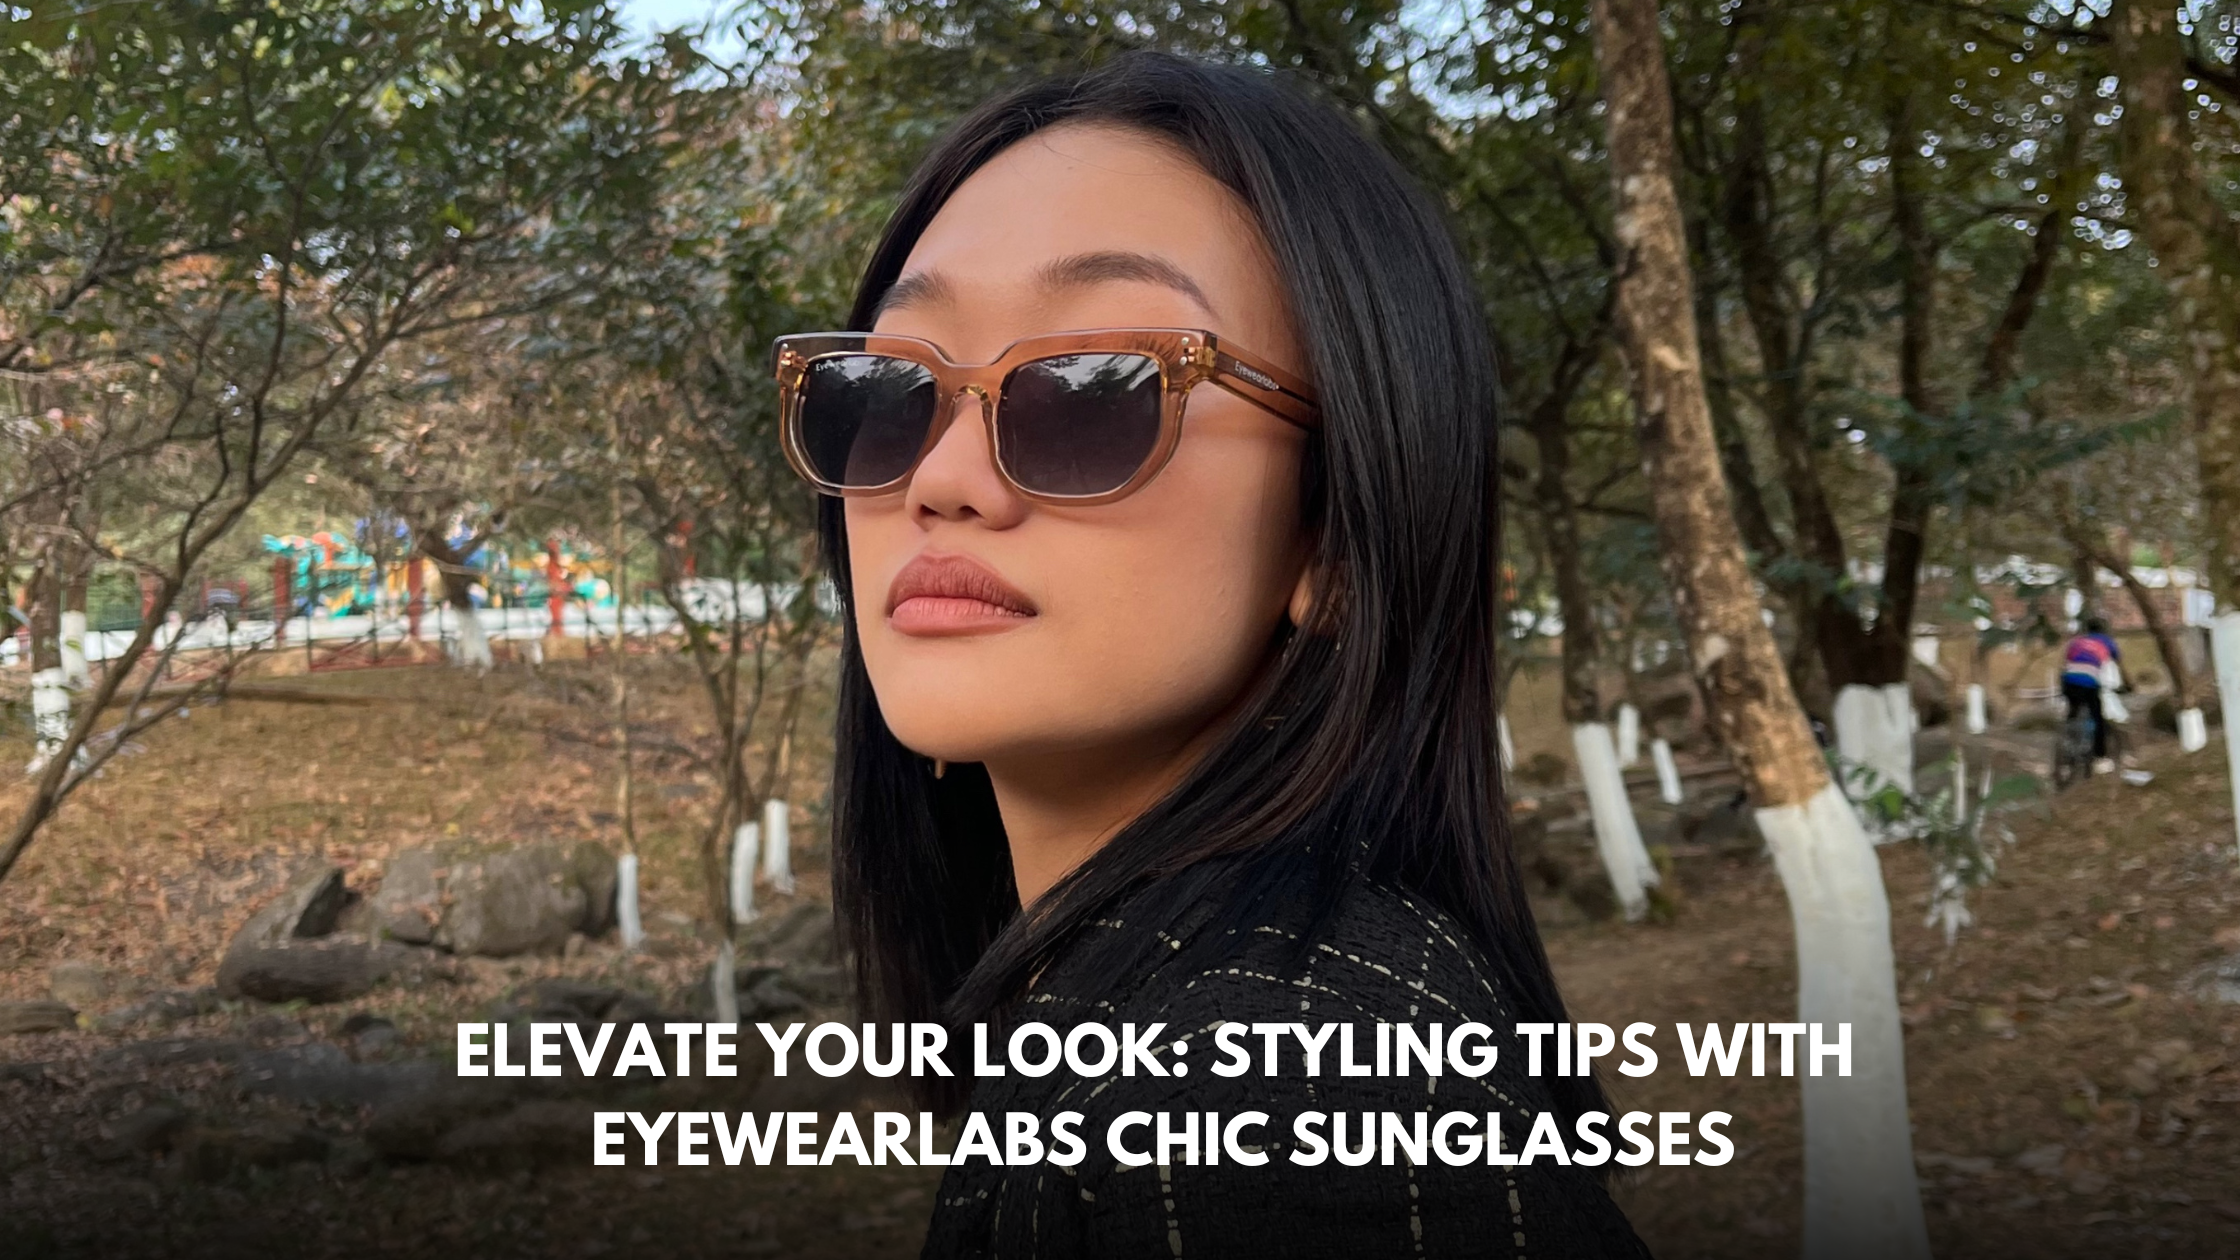 Elevate Your Look: Styling Tips with Eyewearlabs Chic Sunglasses